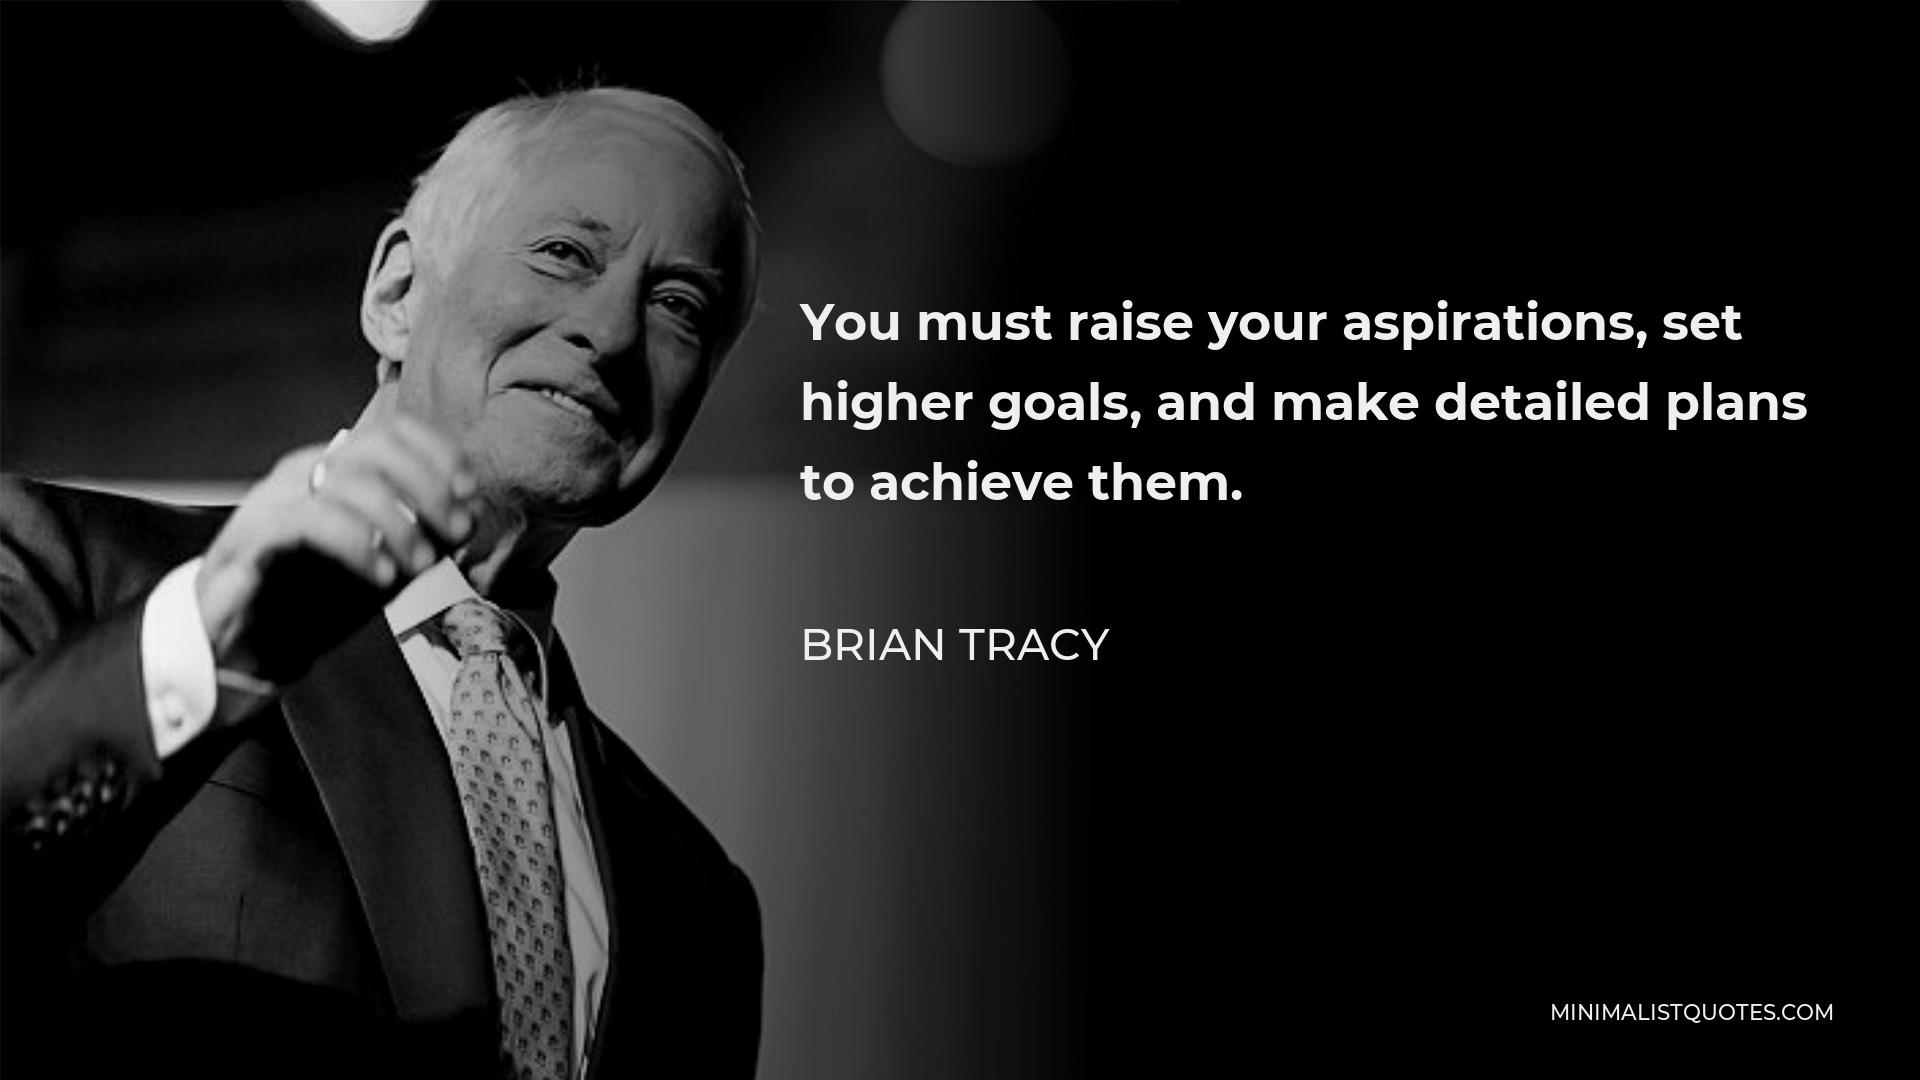 Brian Tracy Quote - You must raise your aspirations, set higher goals, and make detailed plans to achieve them.